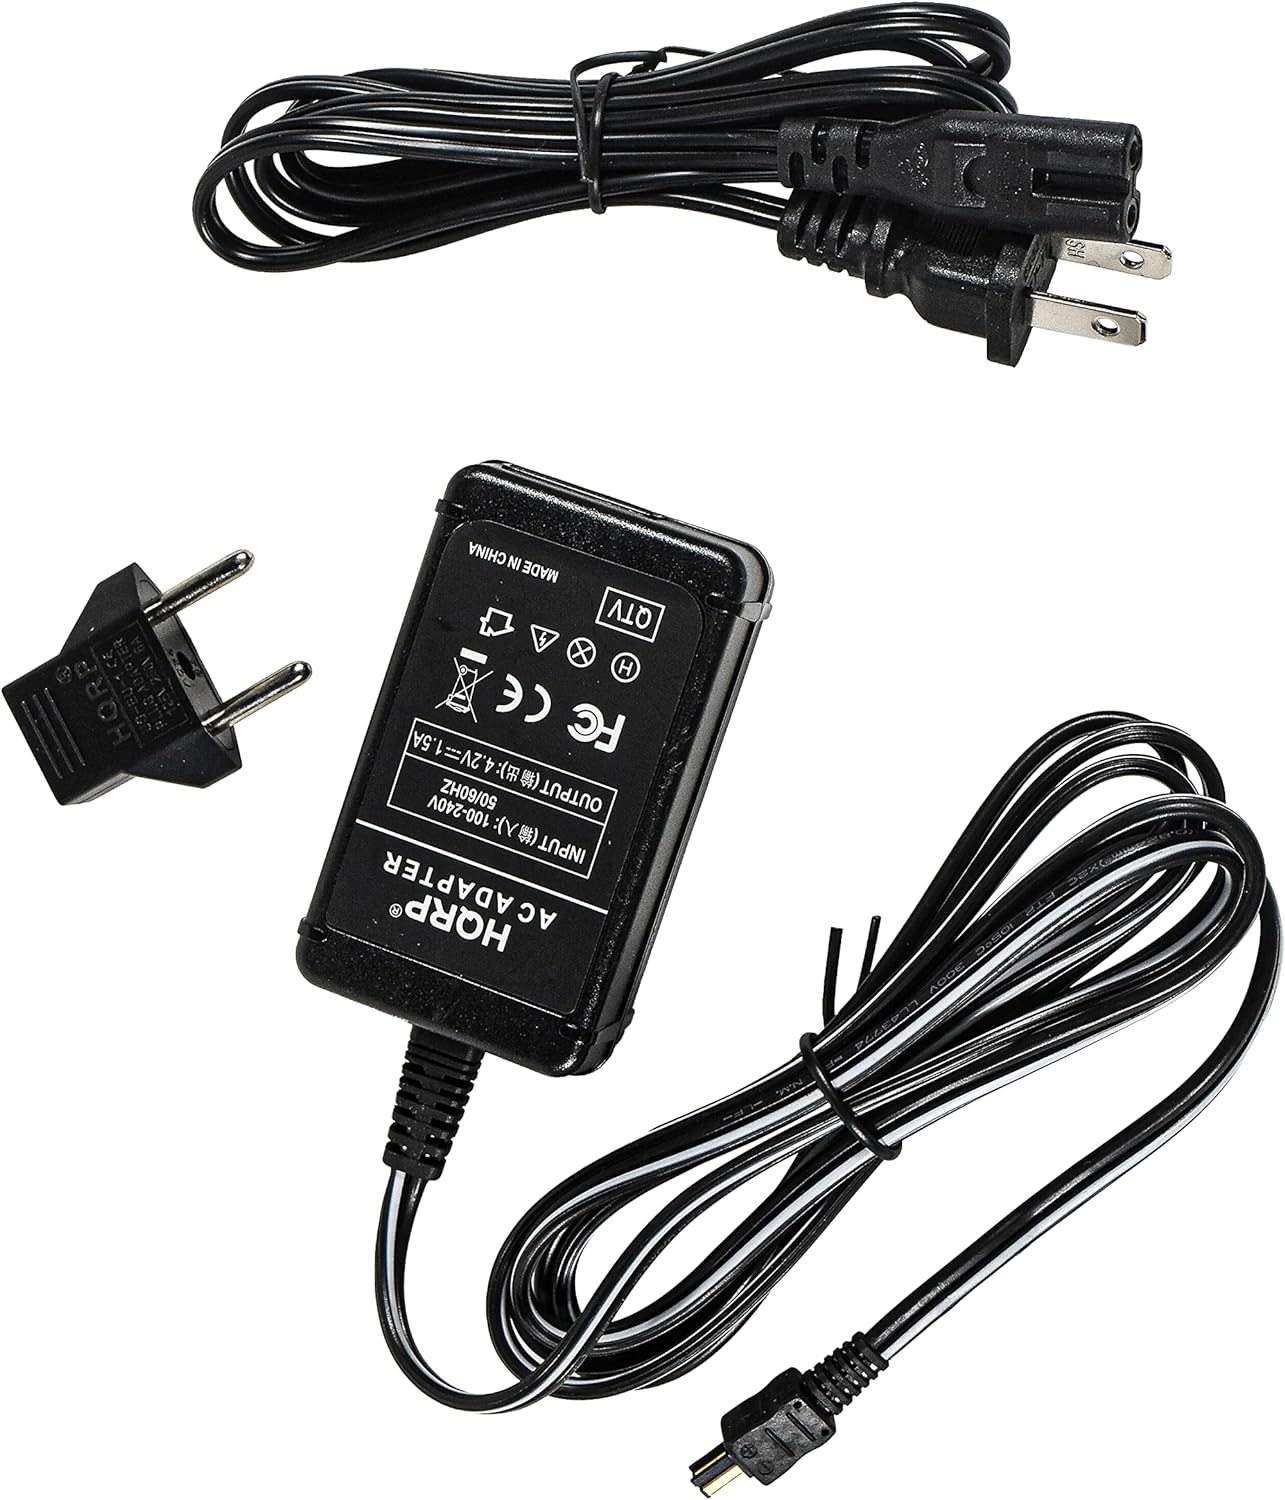 AC Adapter Compatible with Sony CyberShot AC-LS5K AC-LS5 DSC-G1 DSC-G3 DSC-W290 DSC-W300 DSC-P200 DSC-P150 DSC-P200/R DS